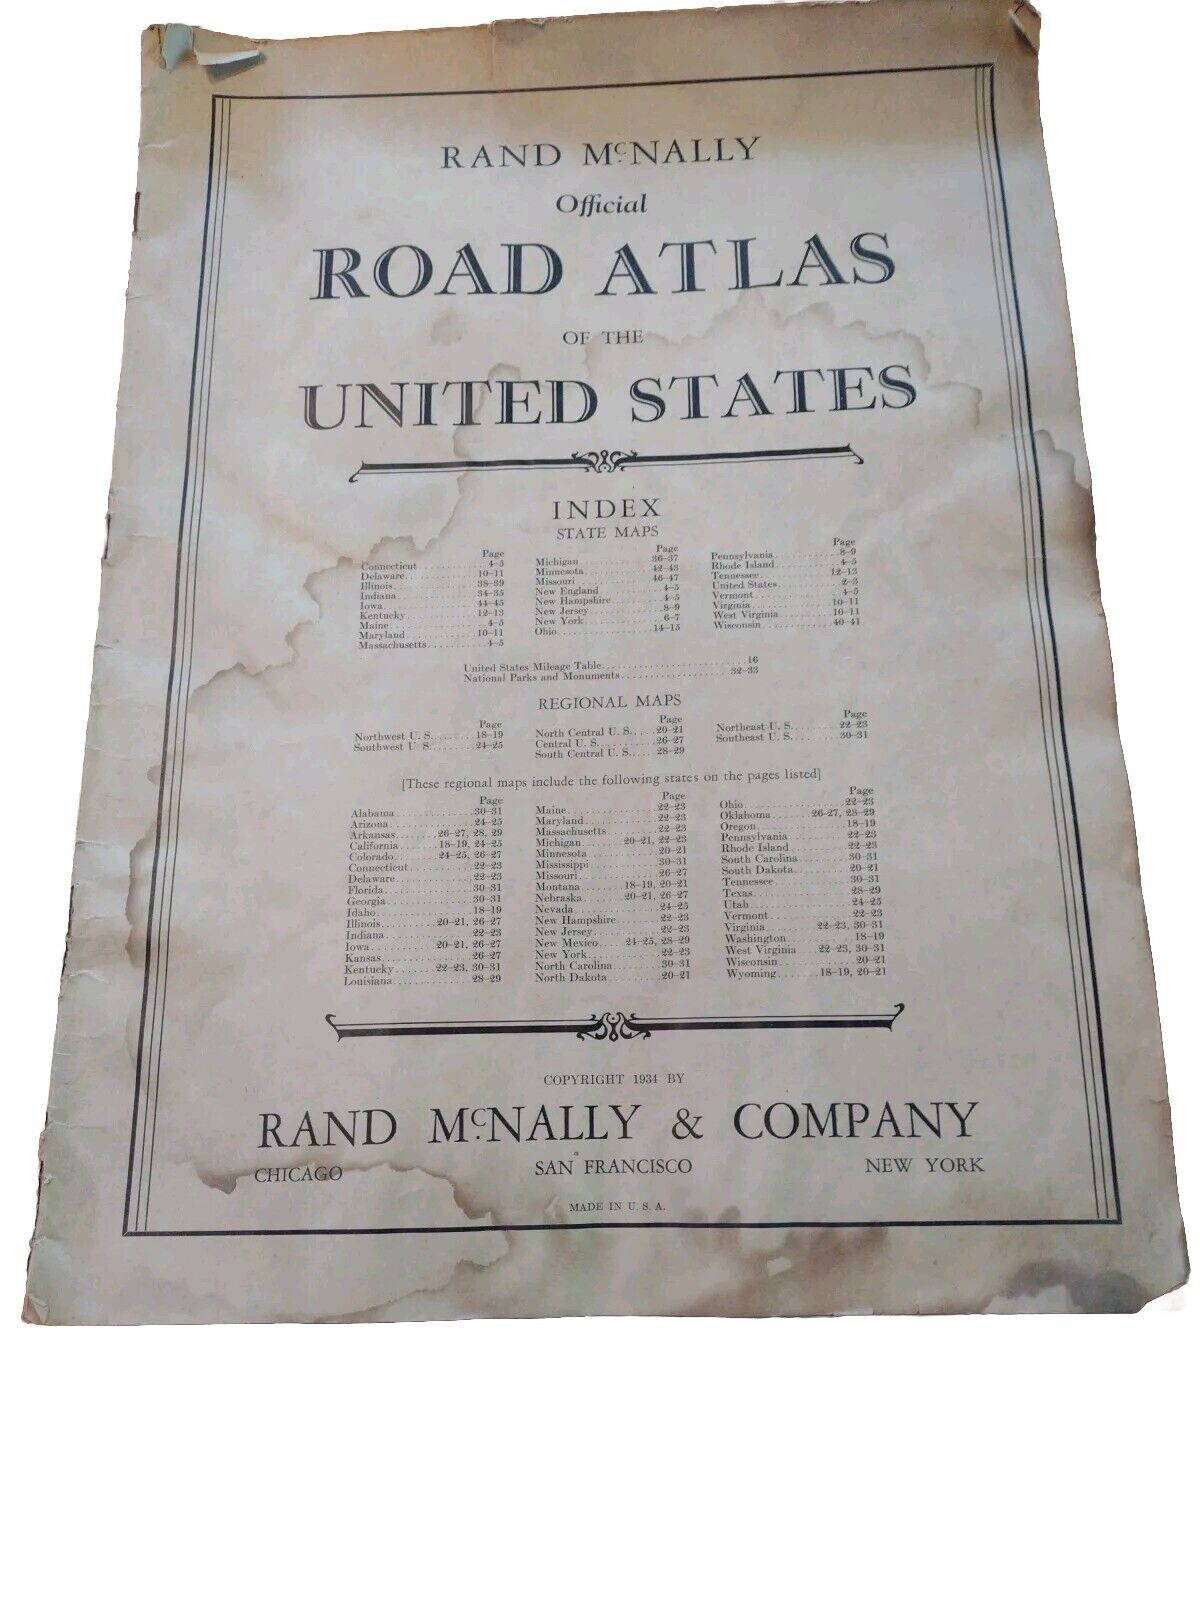 Rand McNally Official Road Atlas Of The U.S. 1934